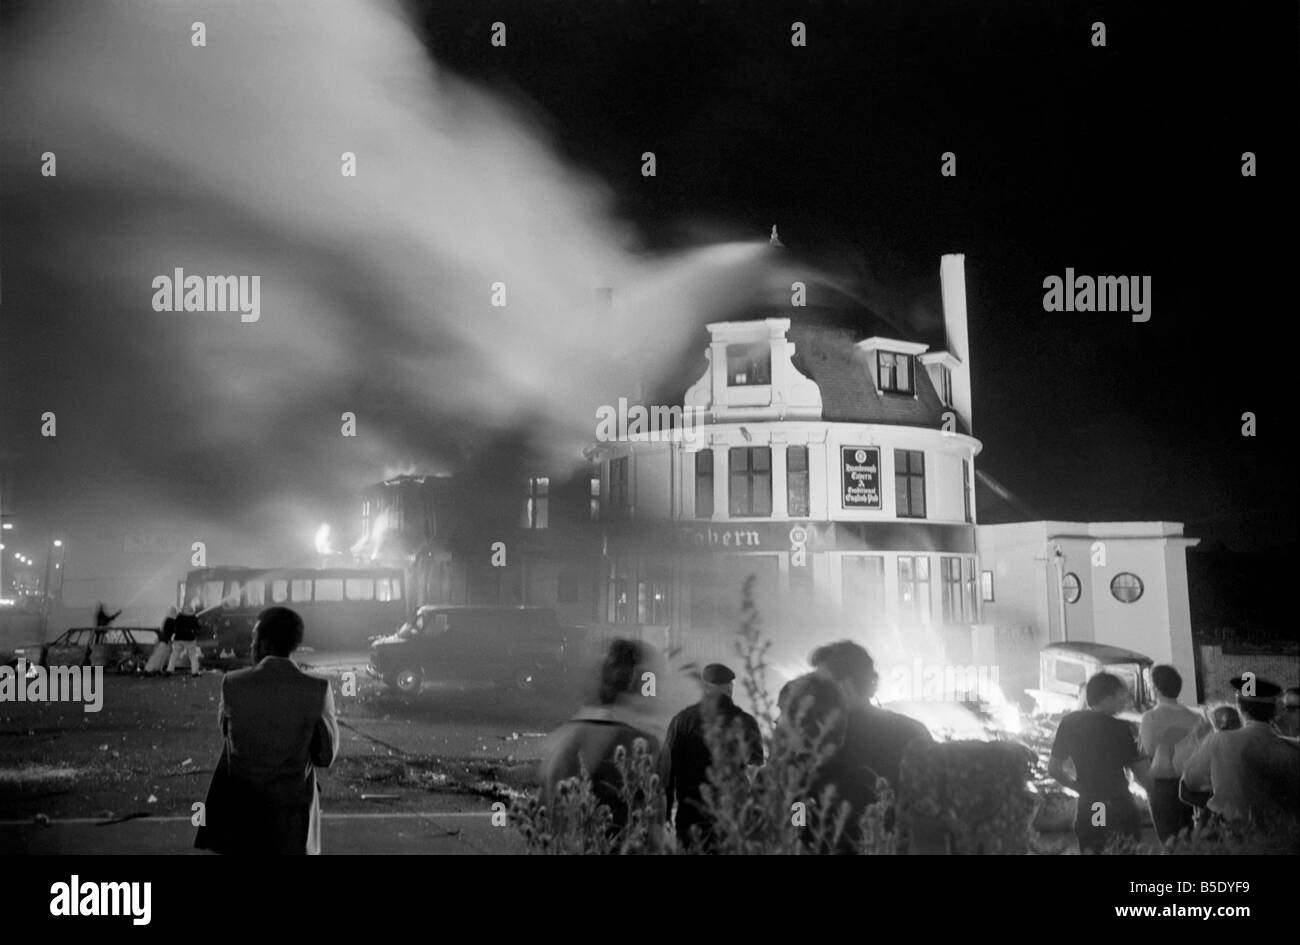 Southall Riots: London: Destruction: The Hambrough Tavern in Uxbridge Road, Southall burning fiercely last night after it had been set alight during clashes between Skinheads and Asian Youths. July 1981 81-03792a-001 Stock Photo